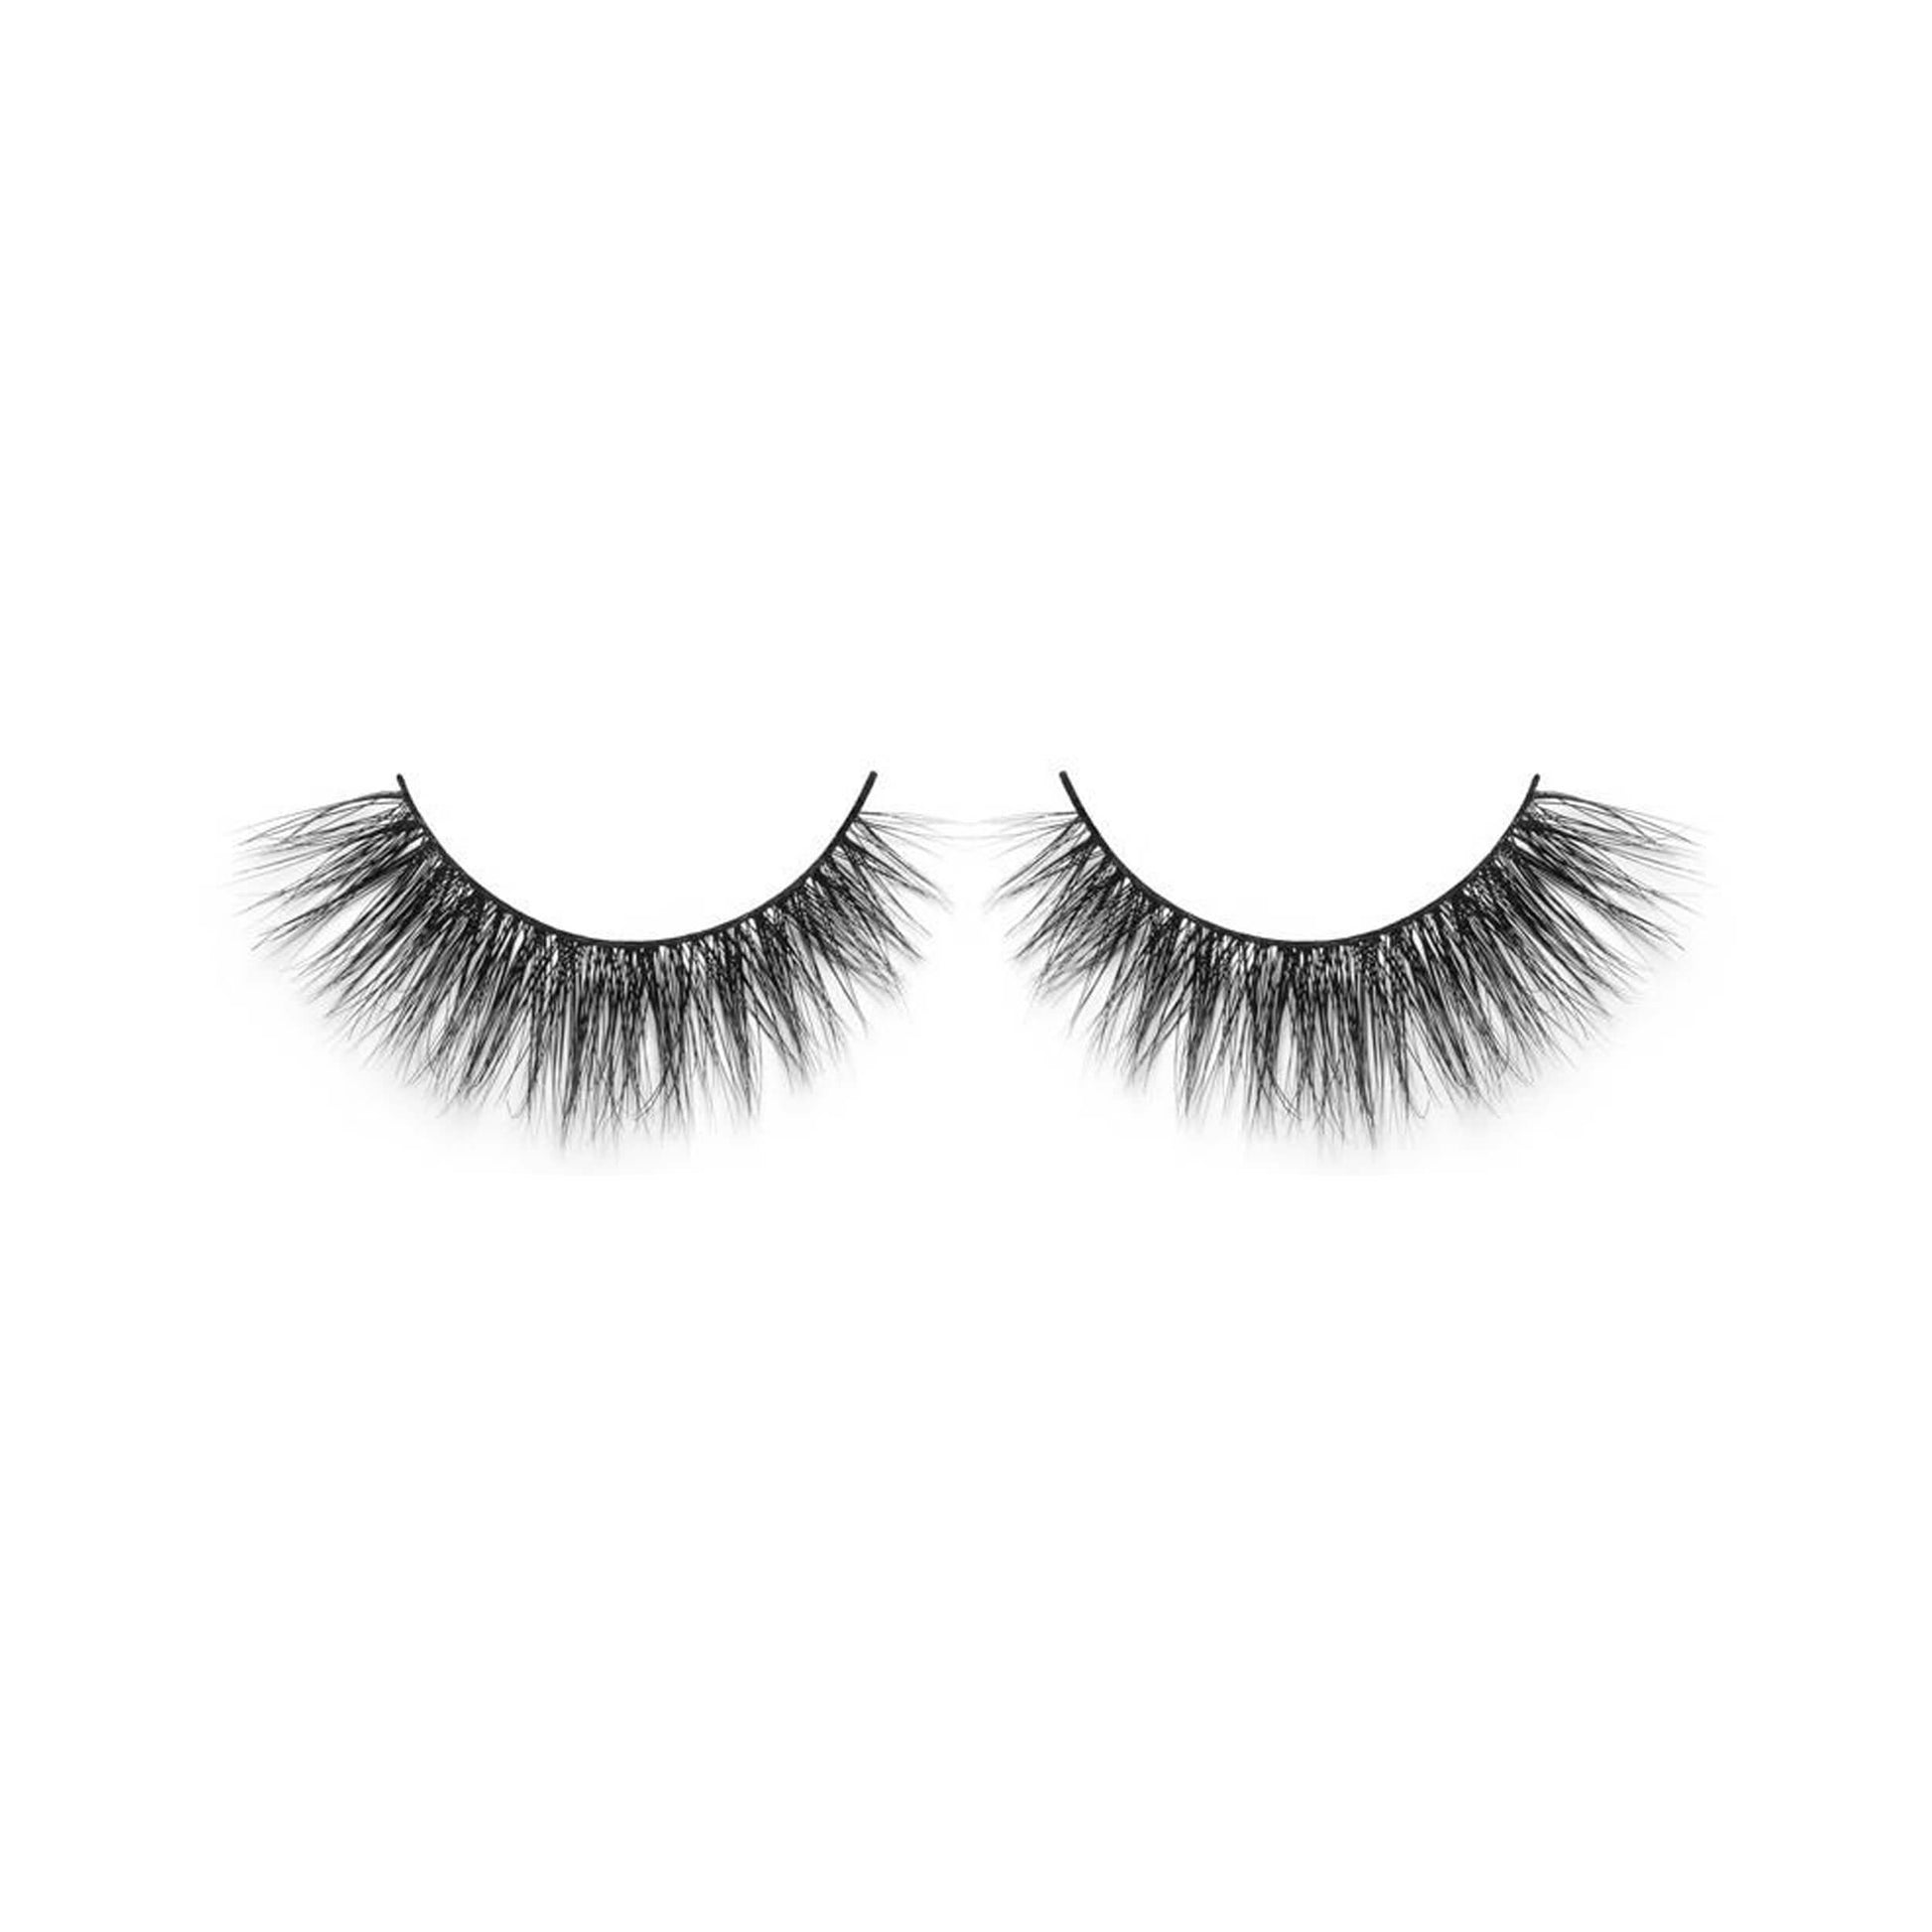 Lilly Lashes NYC 3D Mink Lashes Open